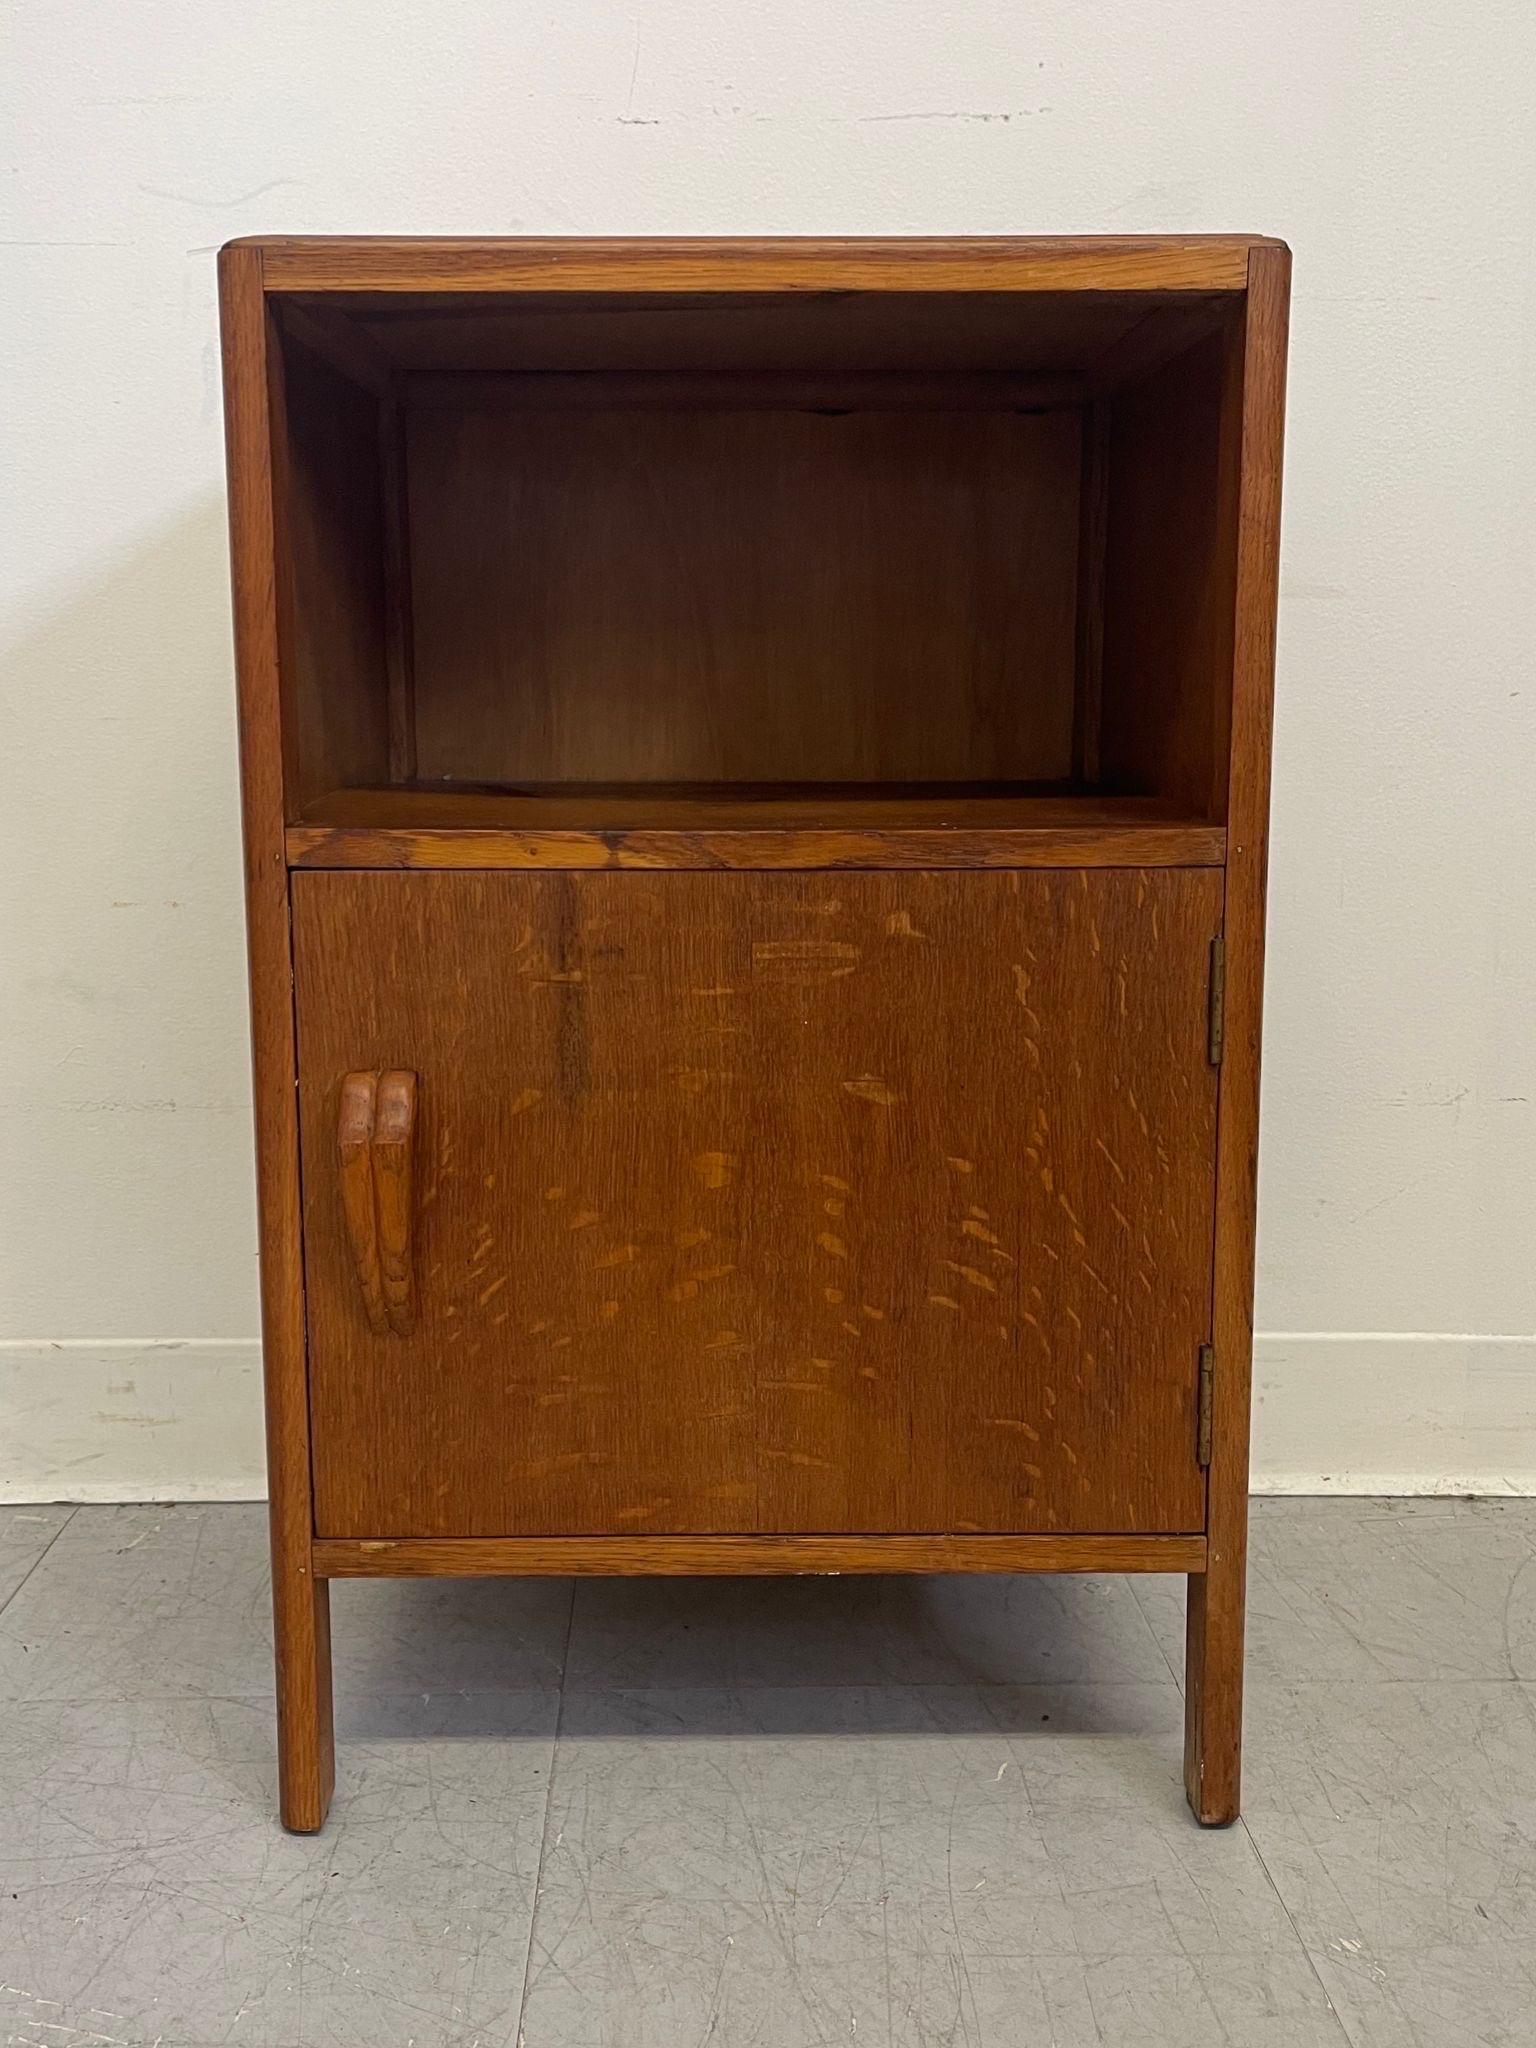 Possibly Tiger Oak based on the unique wood grain. Handle has an interesting carved wood Shape. Open shelf above Cabinet. English Mid Century style. Vintage Condition Consistent with Age as Pictured.

Dimensions. 16 W ; 13 D ; 26 H